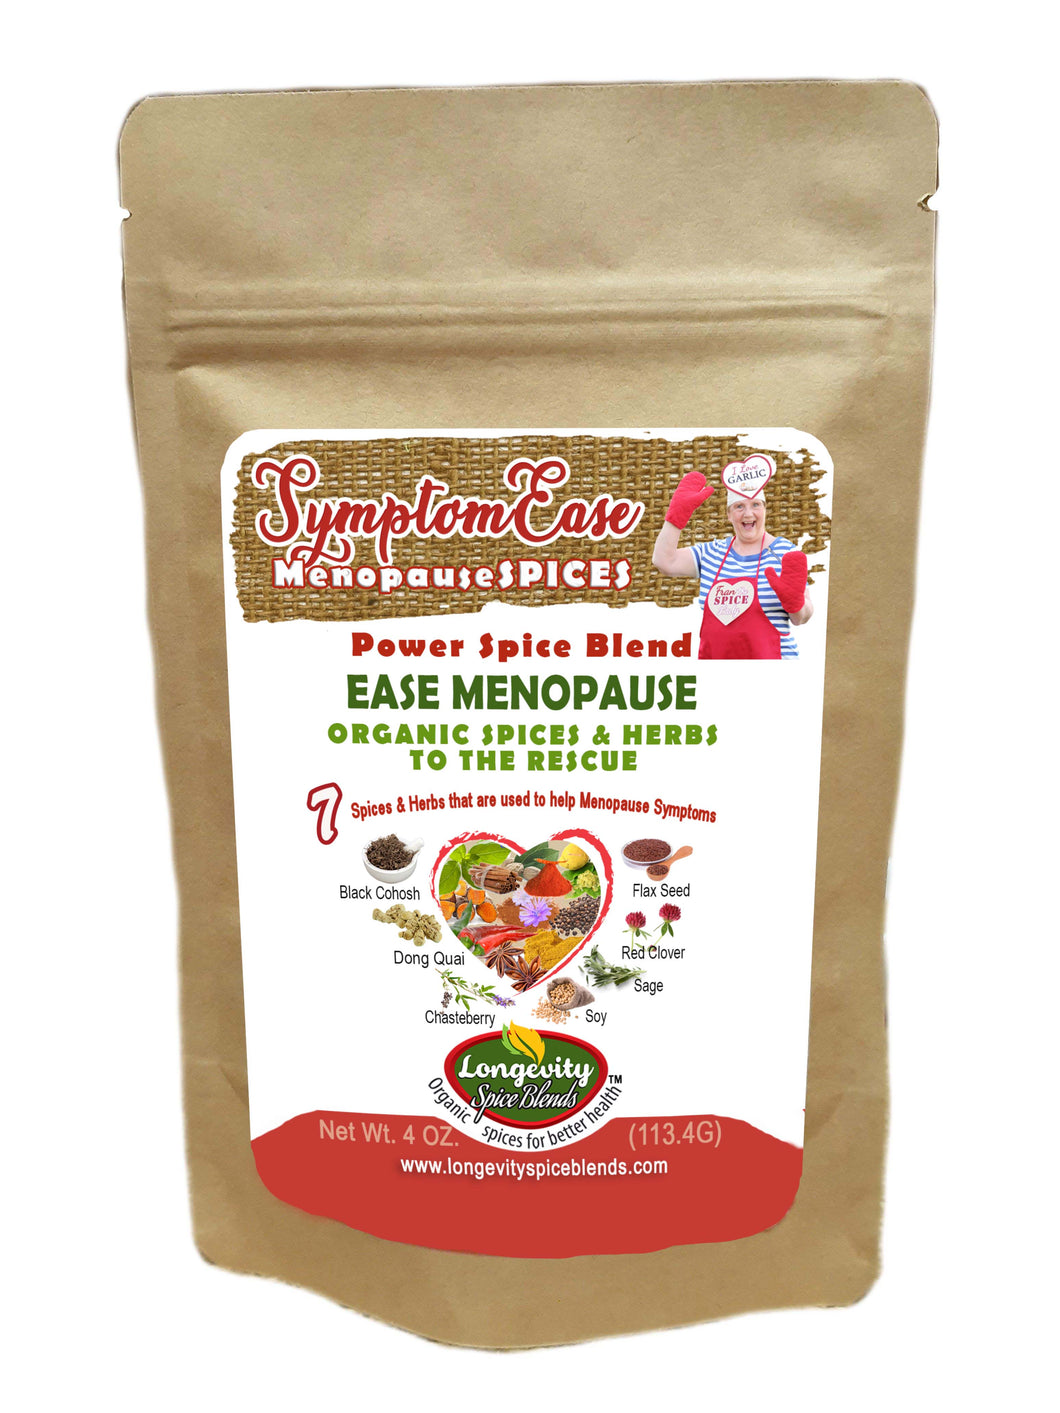 Menopause - SymptomEase Menopause Spice Blend: Discover Natural Relief for Menopause Symptoms